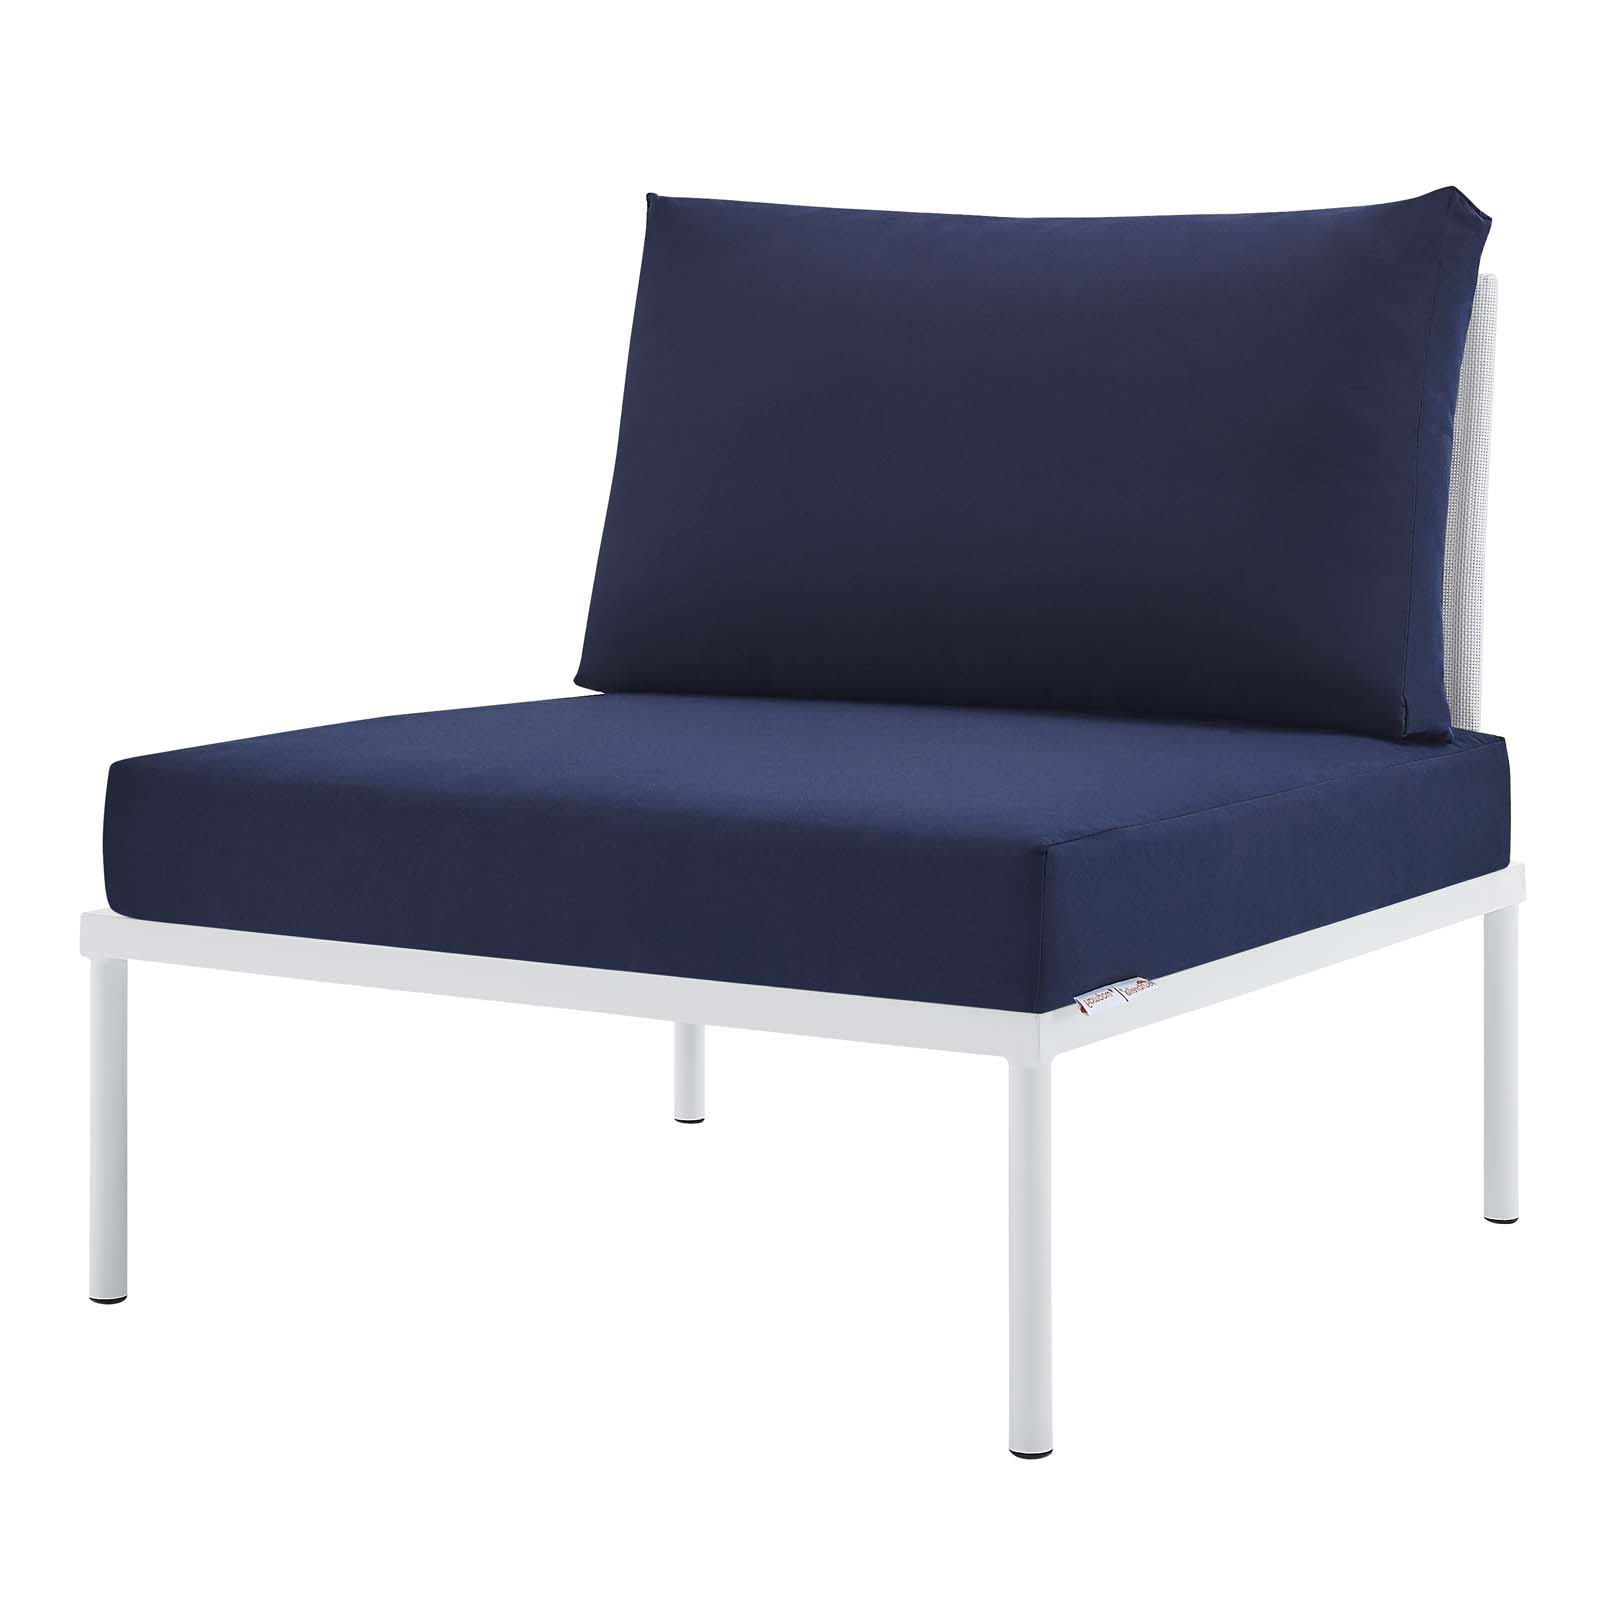 Lounge Sectional Sofa Chair Table Set, Sunbrella, Aluminum, Metal, Steel, White Blue Navy, Modern Contemporary Urban Design, Outdoor Patio Balcony Cafe Bistro Garden Furniture Hotel Hospitality - image 3 of 10